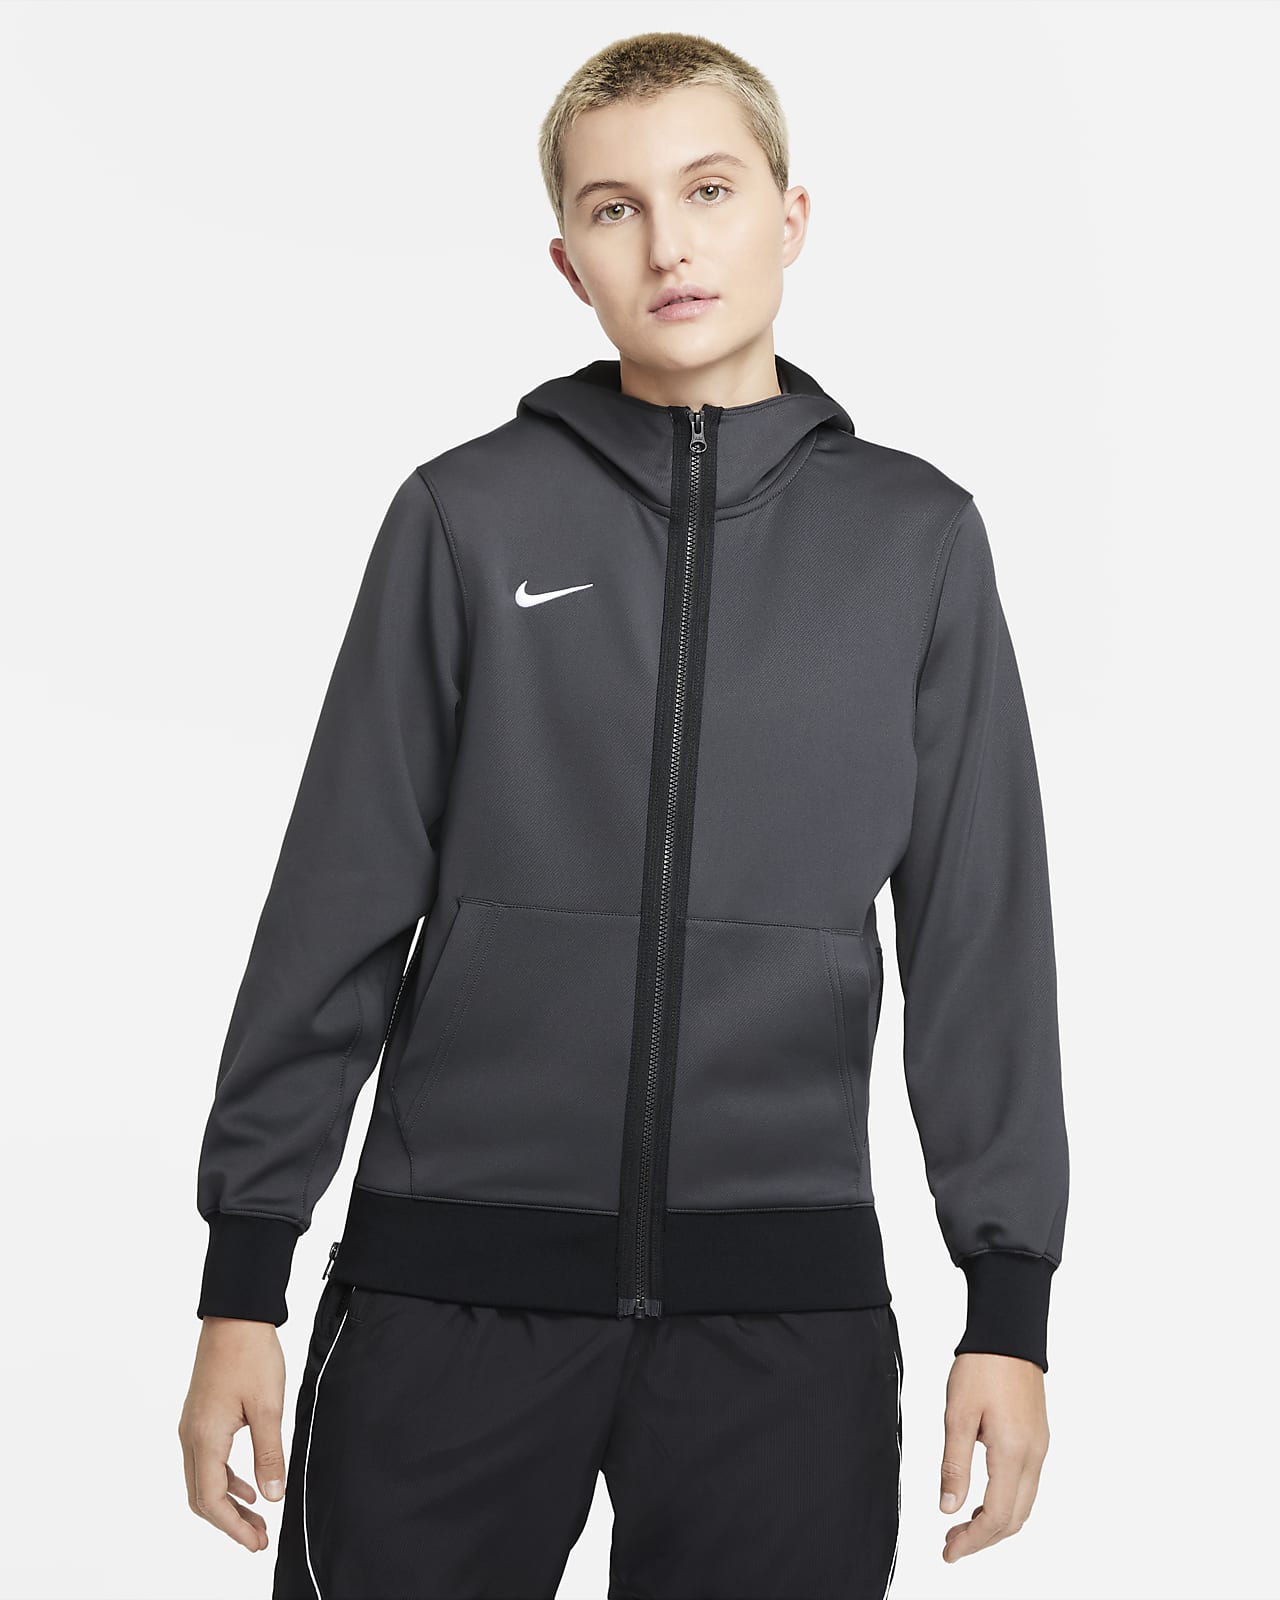 arc Sophisticated exception Nike Dri-FIT Showtime Women's Full-Zip Basketball Hoodie. Nike.com